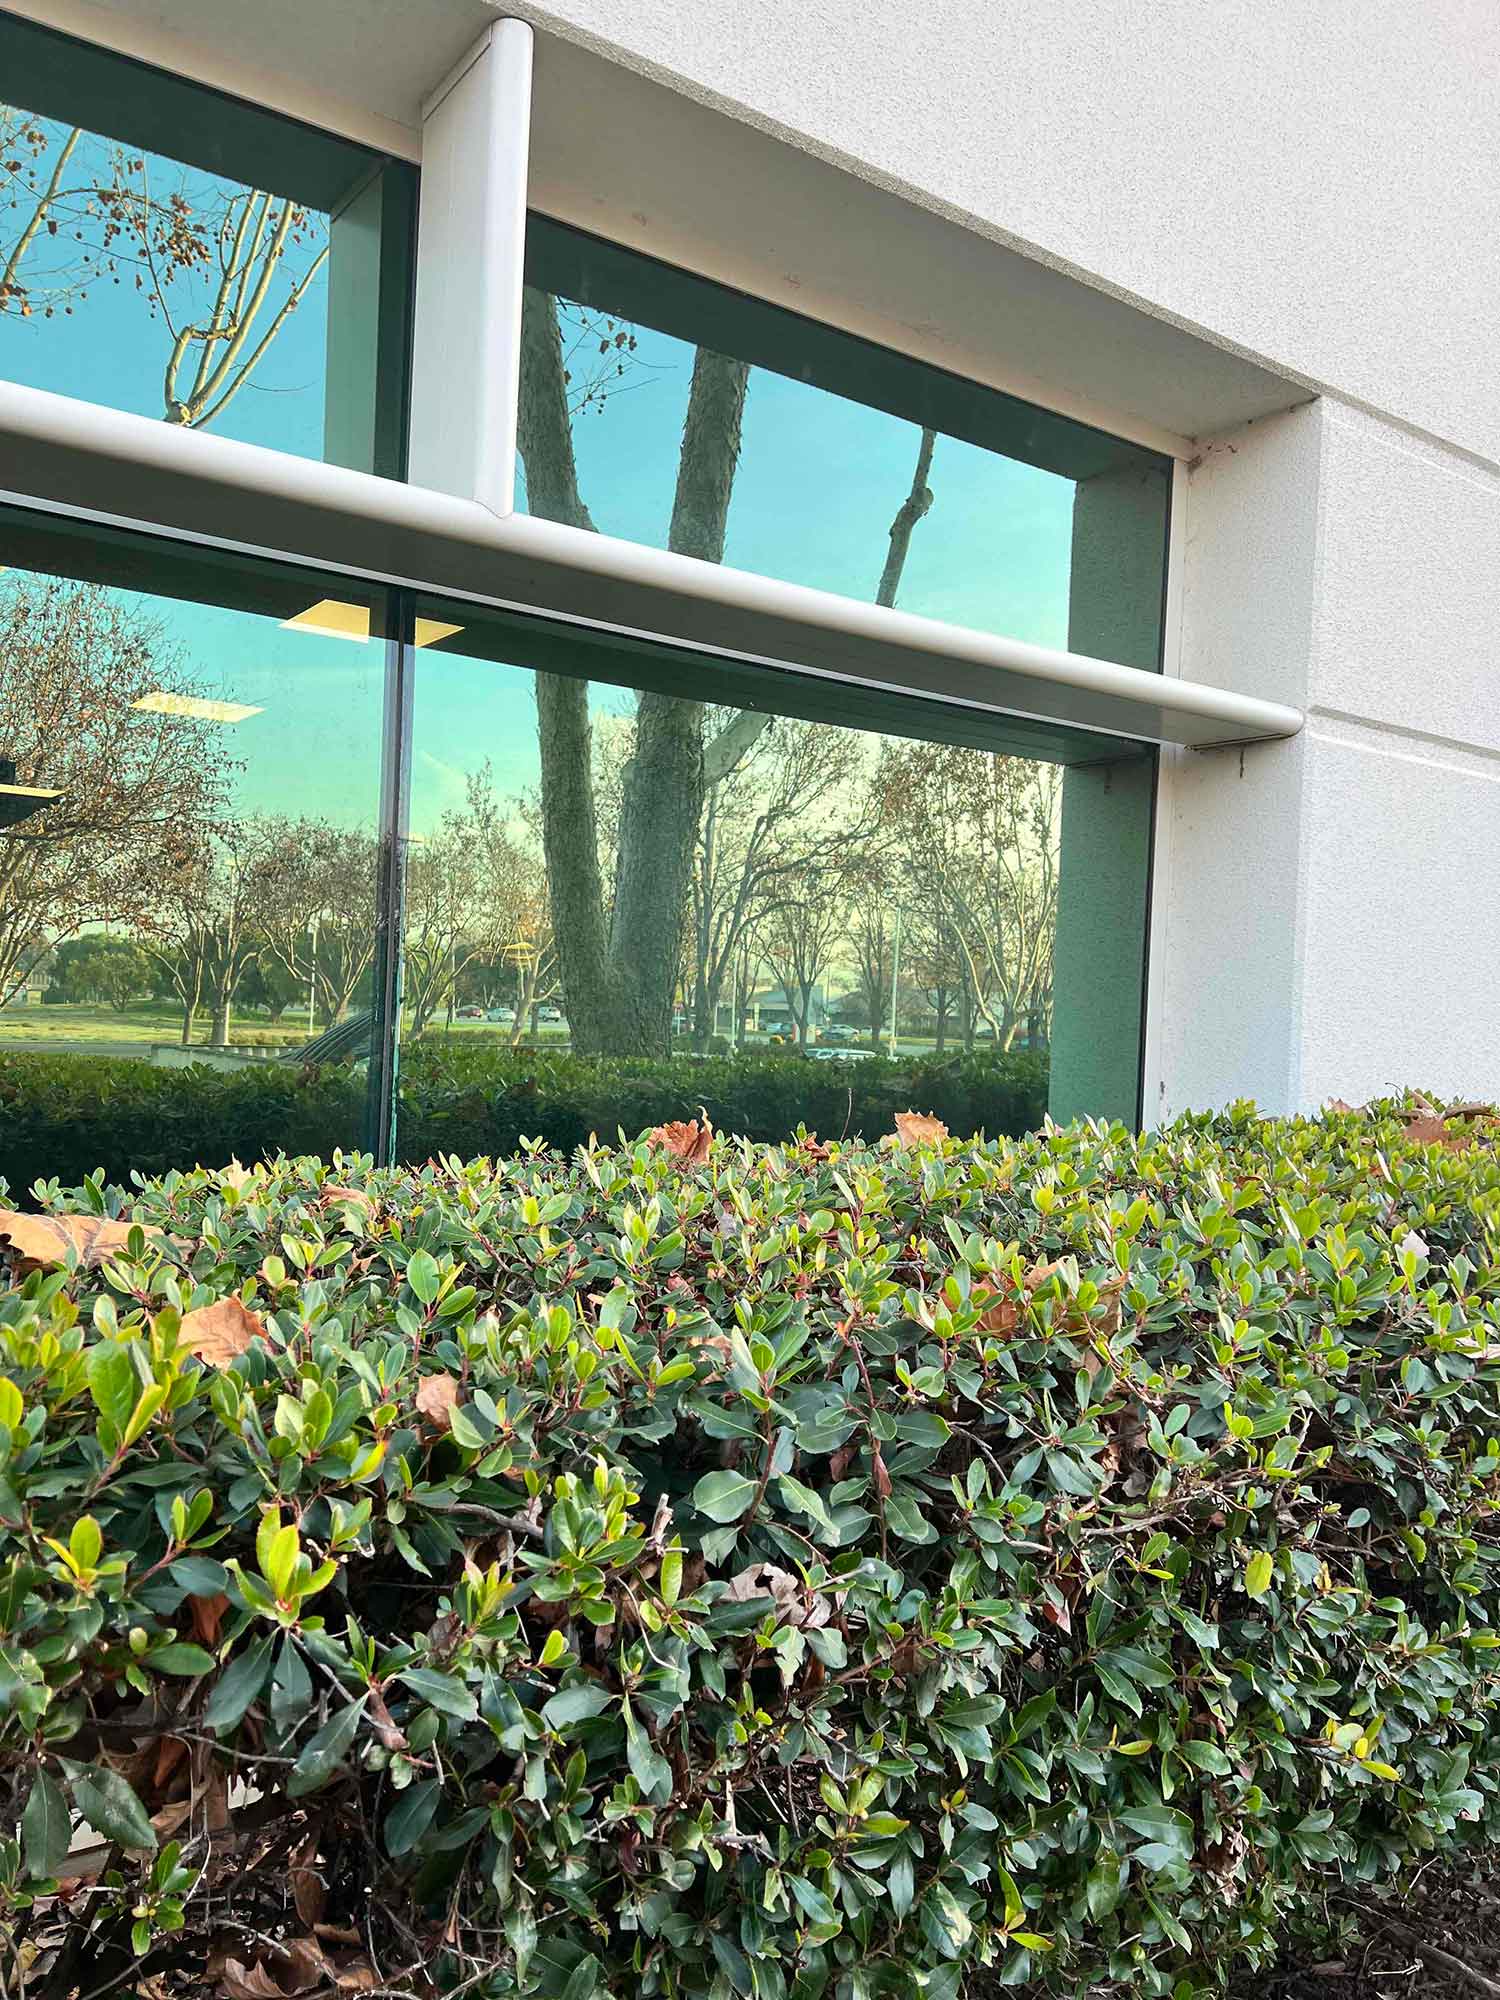 Save money on your energy bills like this San Jose business did, with 3M Night Vision Window Tint.